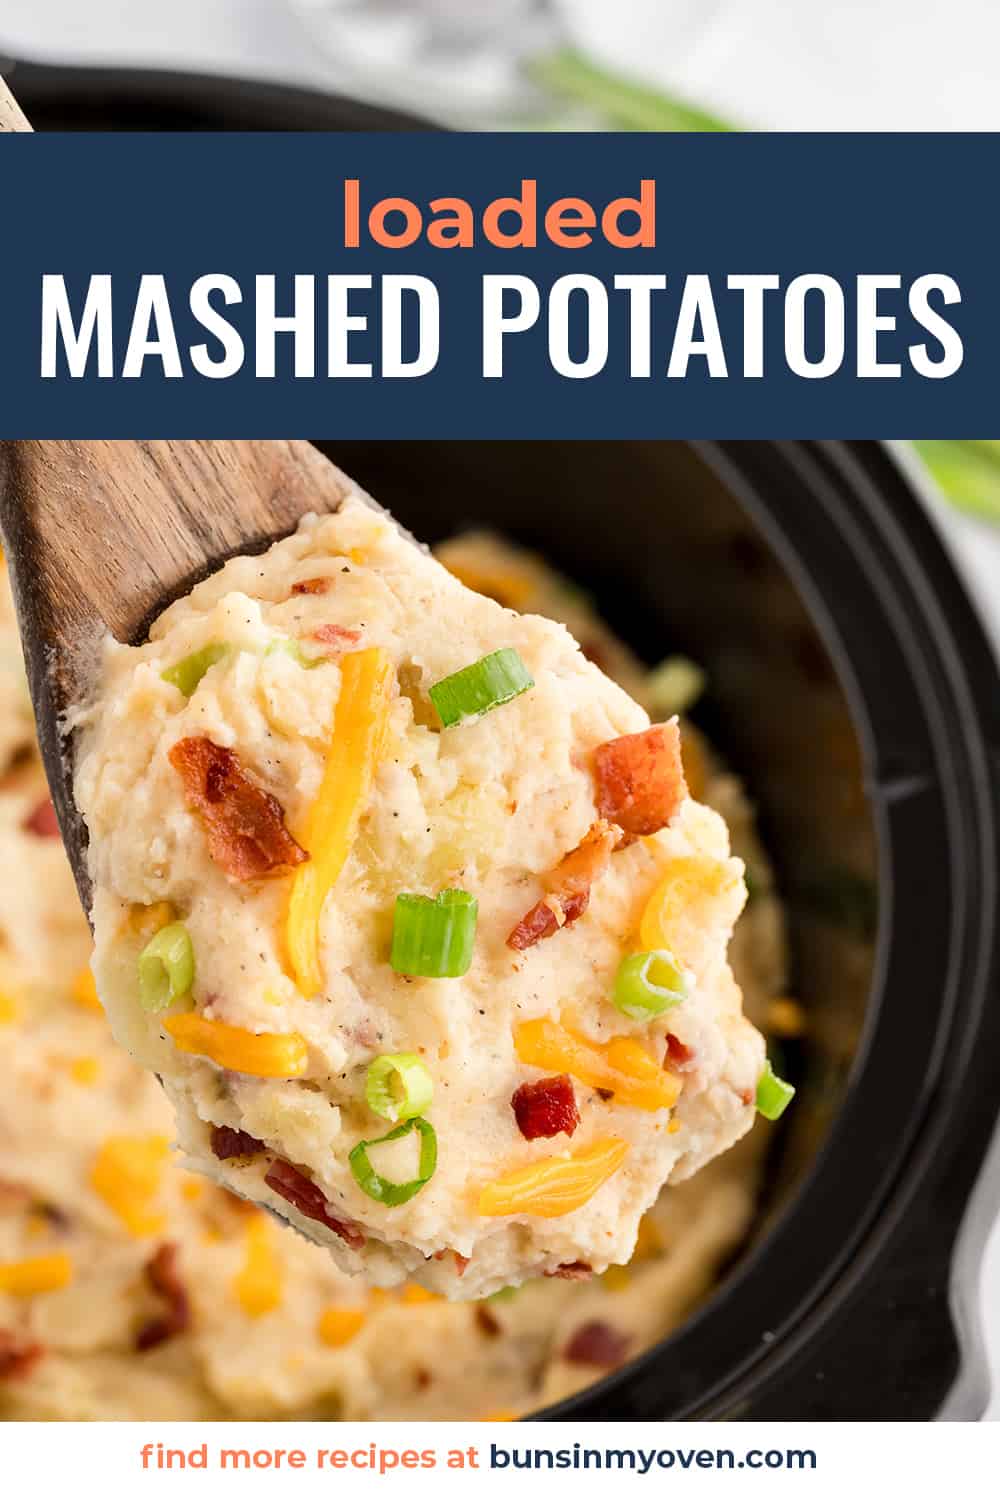 Loaded mashed potatoes on wooden spoon in crockpot.